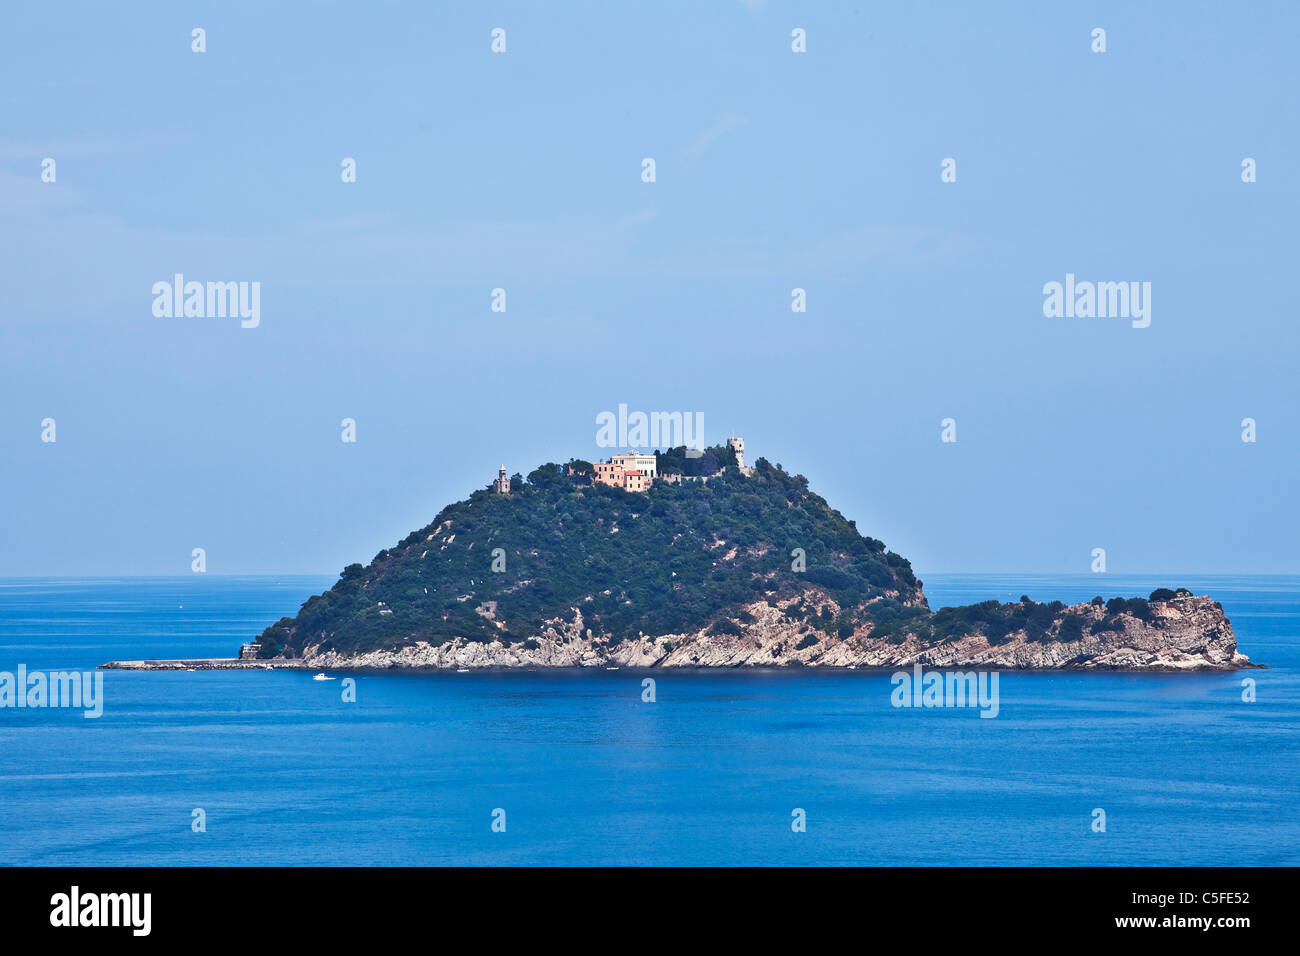 View of the island Gallinara, which is a nature reserve for sea gulls Stock Photo